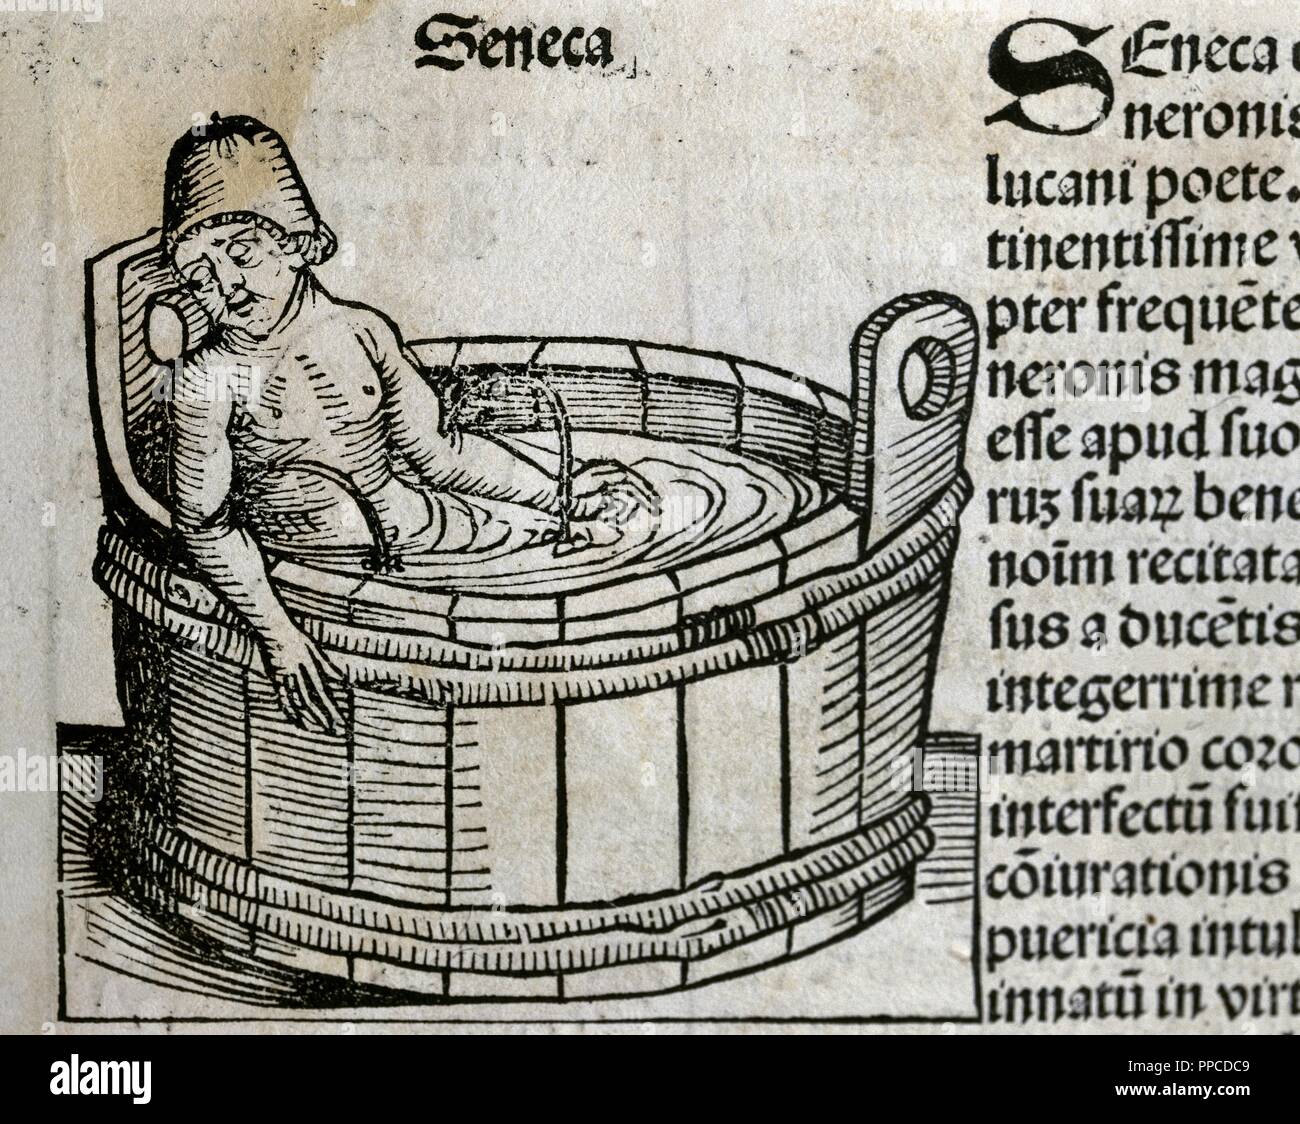 Seneca the Younger (4BC-65AD). Roman Stoic philosopher. Suicide. Engraving by Hatman at Liber Chronicarum. 15th century. Stock Photo